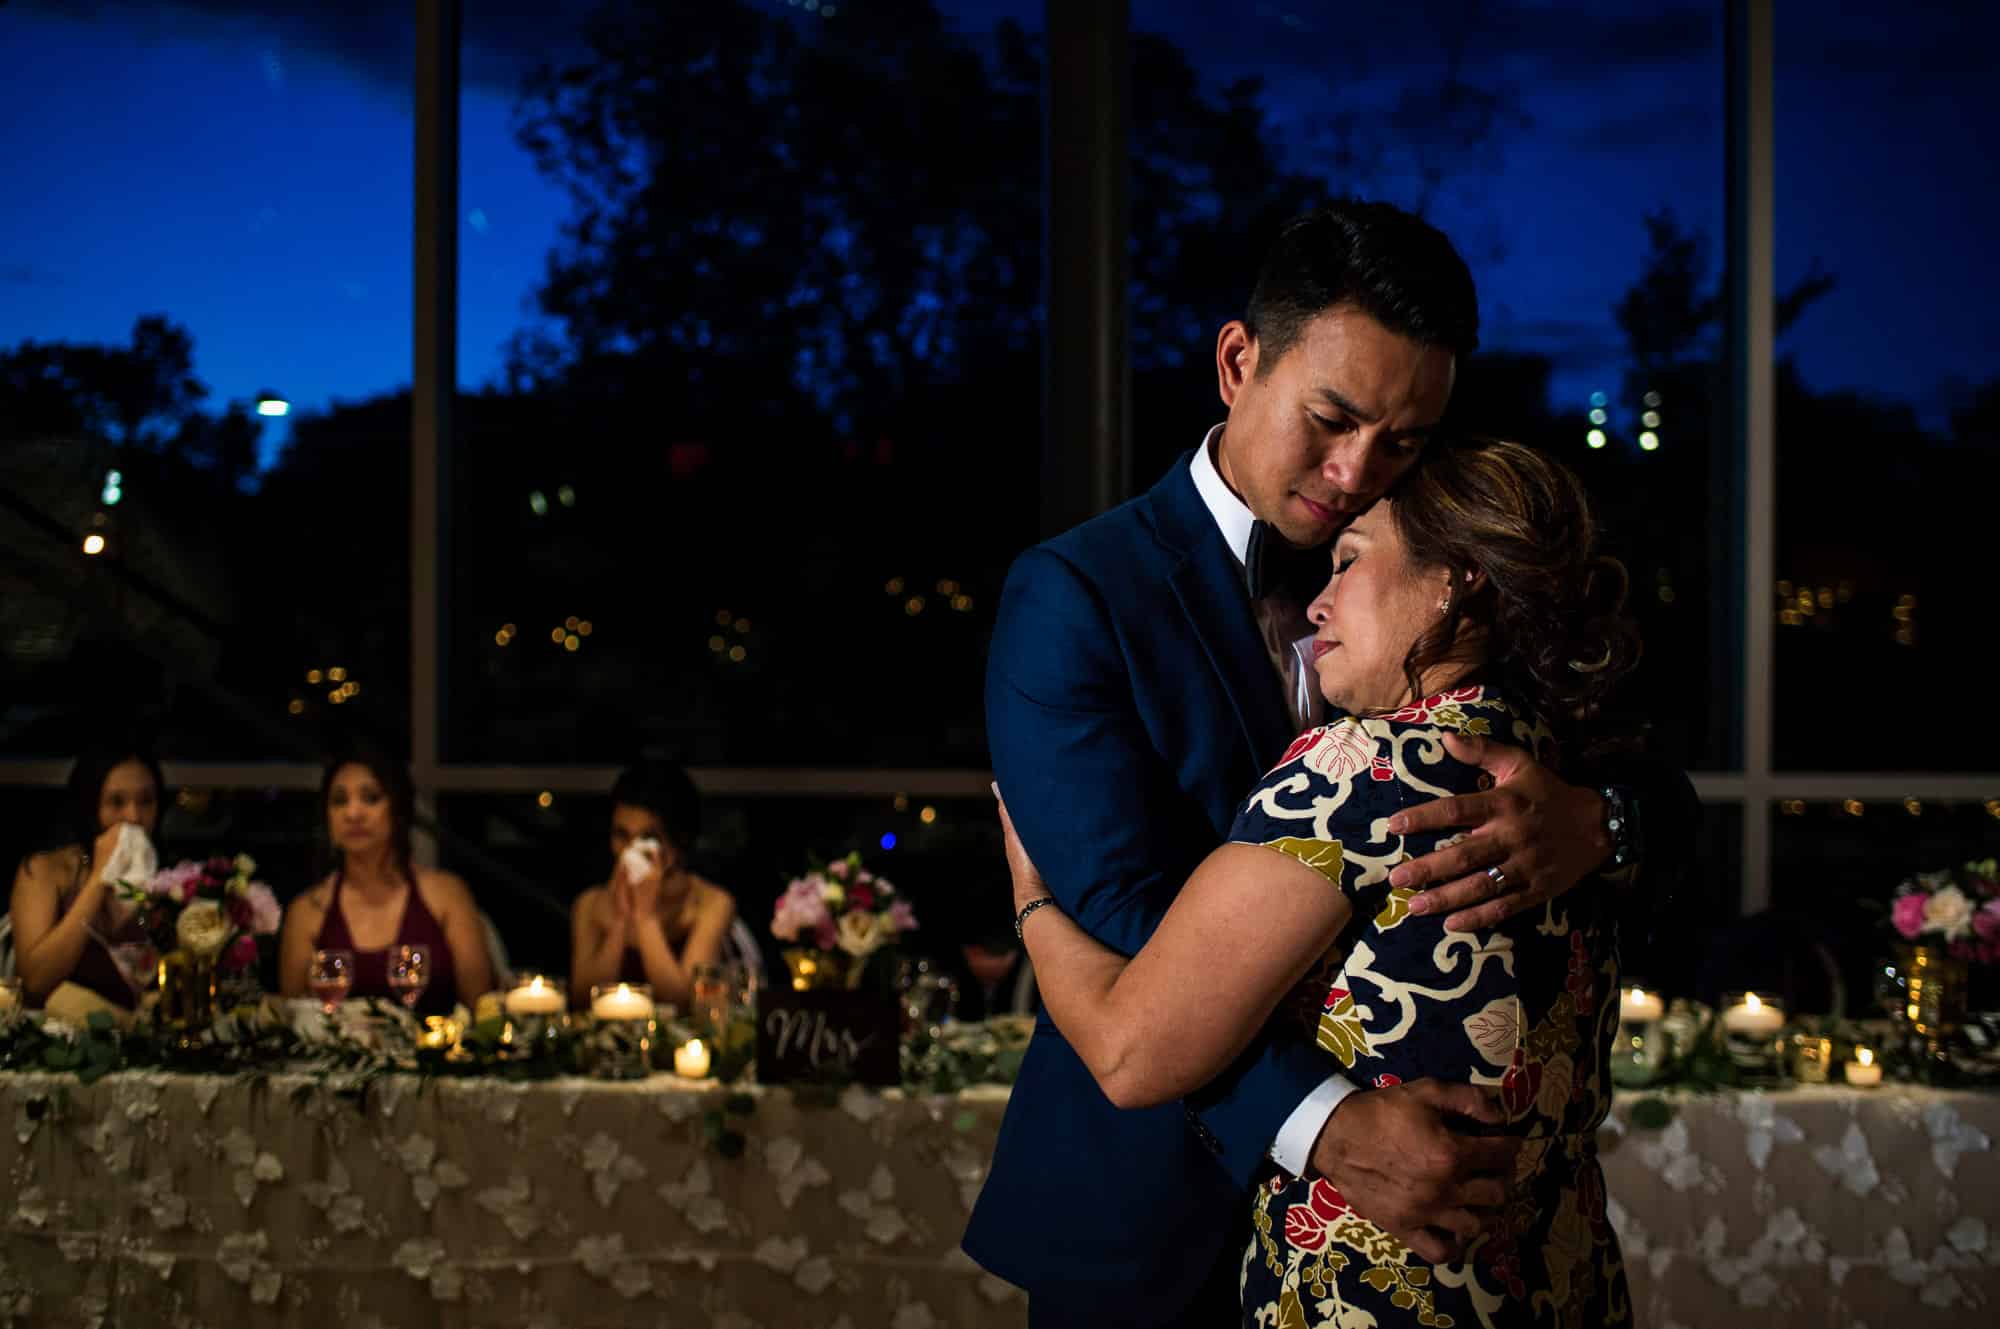 Groom dancing with mom at wedding reception